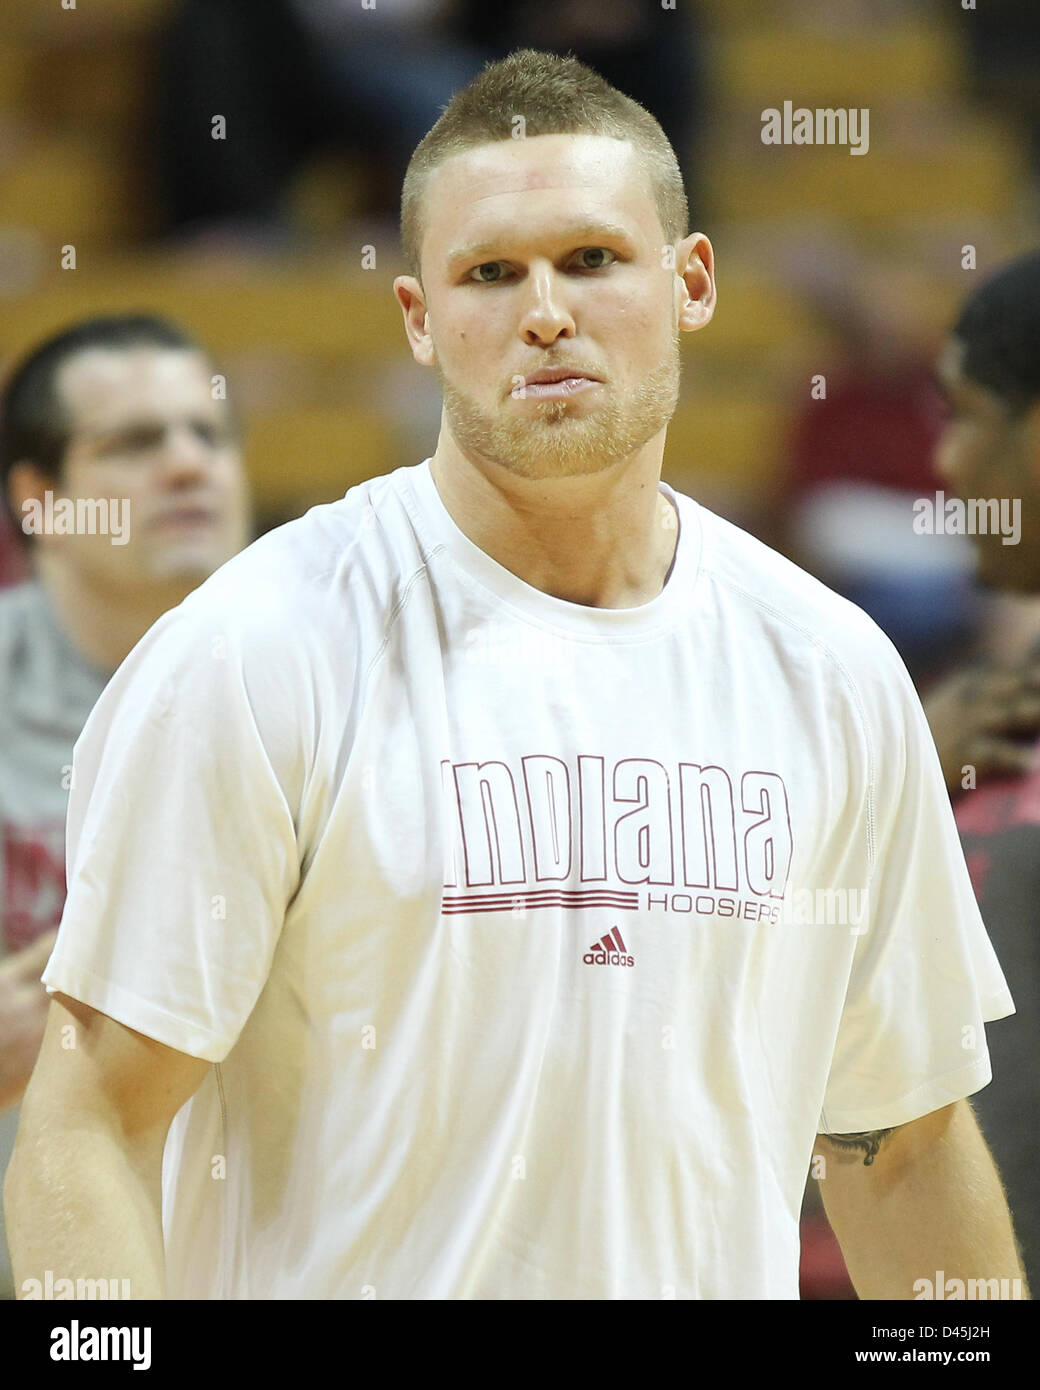 Bloomington, Indiana, USA. 5th March, 2013. Indiana Hoosiers forward Derek Elston (32) warms up before an NCAA basketball game between Ohio State University and Indiana University at Assembly Hall in Bloomington, Indiana. Stock Photo